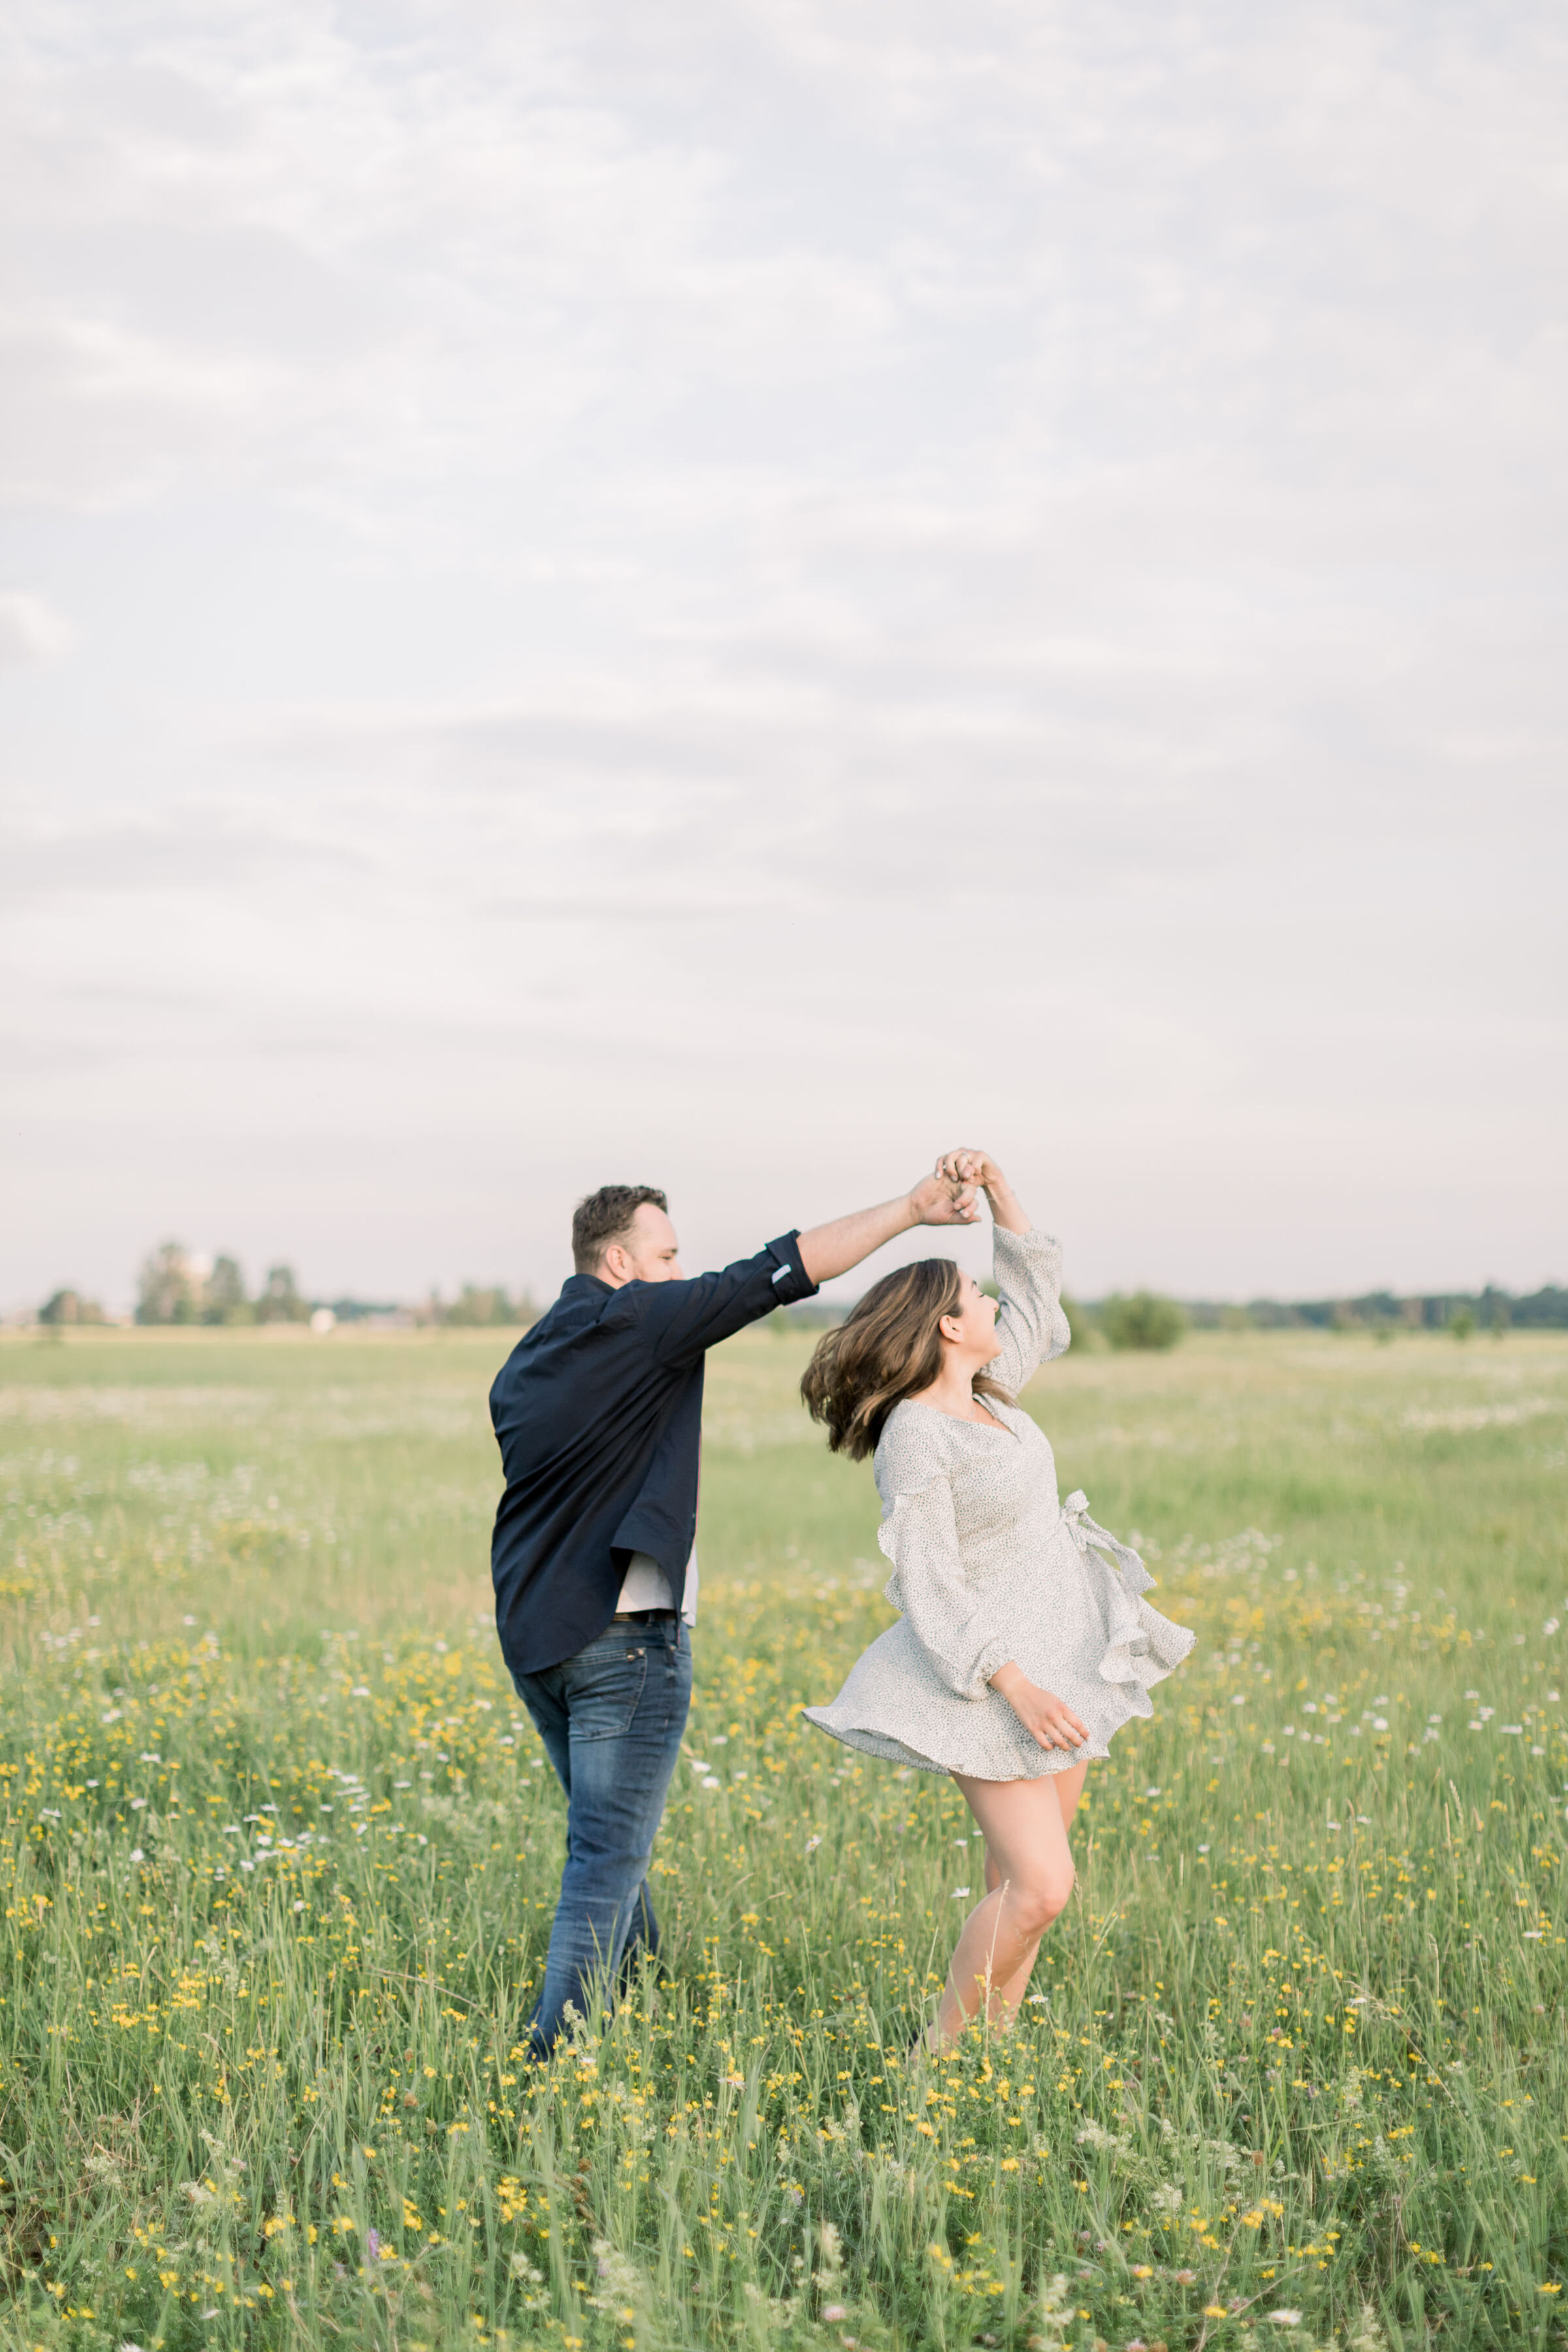  Adorable engagement candid shot of couple dancing in a green field during a spring photoshoot in Ottawa, ON by Chelsea Mason Photography. candid couple photos poses for engagements best locations for spring photoshoot in ottawa outfit inspo for enga